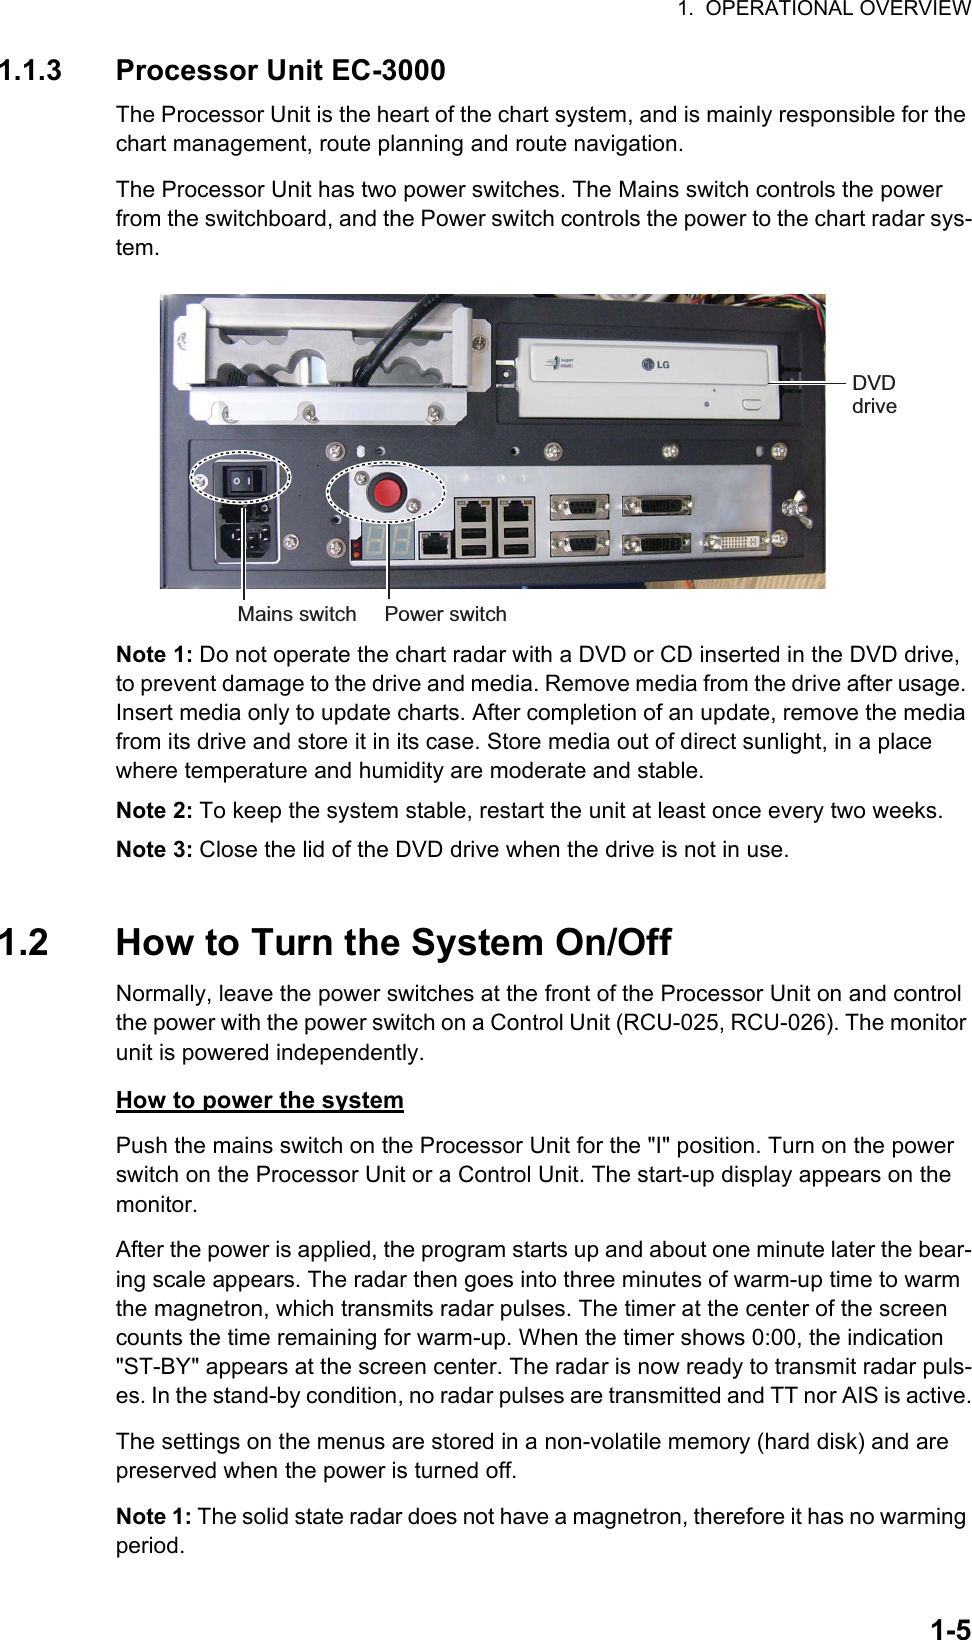 1.  OPERATIONAL OVERVIEW1-51.1.3 Processor Unit EC-3000The Processor Unit is the heart of the chart system, and is mainly responsible for the chart management, route planning and route navigation.The Processor Unit has two power switches. The Mains switch controls the power from the switchboard, and the Power switch controls the power to the chart radar sys-tem.Note 1: Do not operate the chart radar with a DVD or CD inserted in the DVD drive, to prevent damage to the drive and media. Remove media from the drive after usage. Insert media only to update charts. After completion of an update, remove the media from its drive and store it in its case. Store media out of direct sunlight, in a place where temperature and humidity are moderate and stable.Note 2: To keep the system stable, restart the unit at least once every two weeks.Note 3: Close the lid of the DVD drive when the drive is not in use.1.2 How to Turn the System On/OffNormally, leave the power switches at the front of the Processor Unit on and control the power with the power switch on a Control Unit (RCU-025, RCU-026). The monitor unit is powered independently.How to power the systemPush the mains switch on the Processor Unit for the &quot;I&quot; position. Turn on the power switch on the Processor Unit or a Control Unit. The start-up display appears on the monitor.After the power is applied, the program starts up and about one minute later the bear-ing scale appears. The radar then goes into three minutes of warm-up time to warm the magnetron, which transmits radar pulses. The timer at the center of the screen counts the time remaining for warm-up. When the timer shows 0:00, the indication &quot;ST-BY&quot; appears at the screen center. The radar is now ready to transmit radar puls-es. In the stand-by condition, no radar pulses are transmitted and TT nor AIS is active.The settings on the menus are stored in a non-volatile memory (hard disk) and are preserved when the power is turned off.Note 1: The solid state radar does not have a magnetron, therefore it has no warming period.Power switchDVD driveMains switch